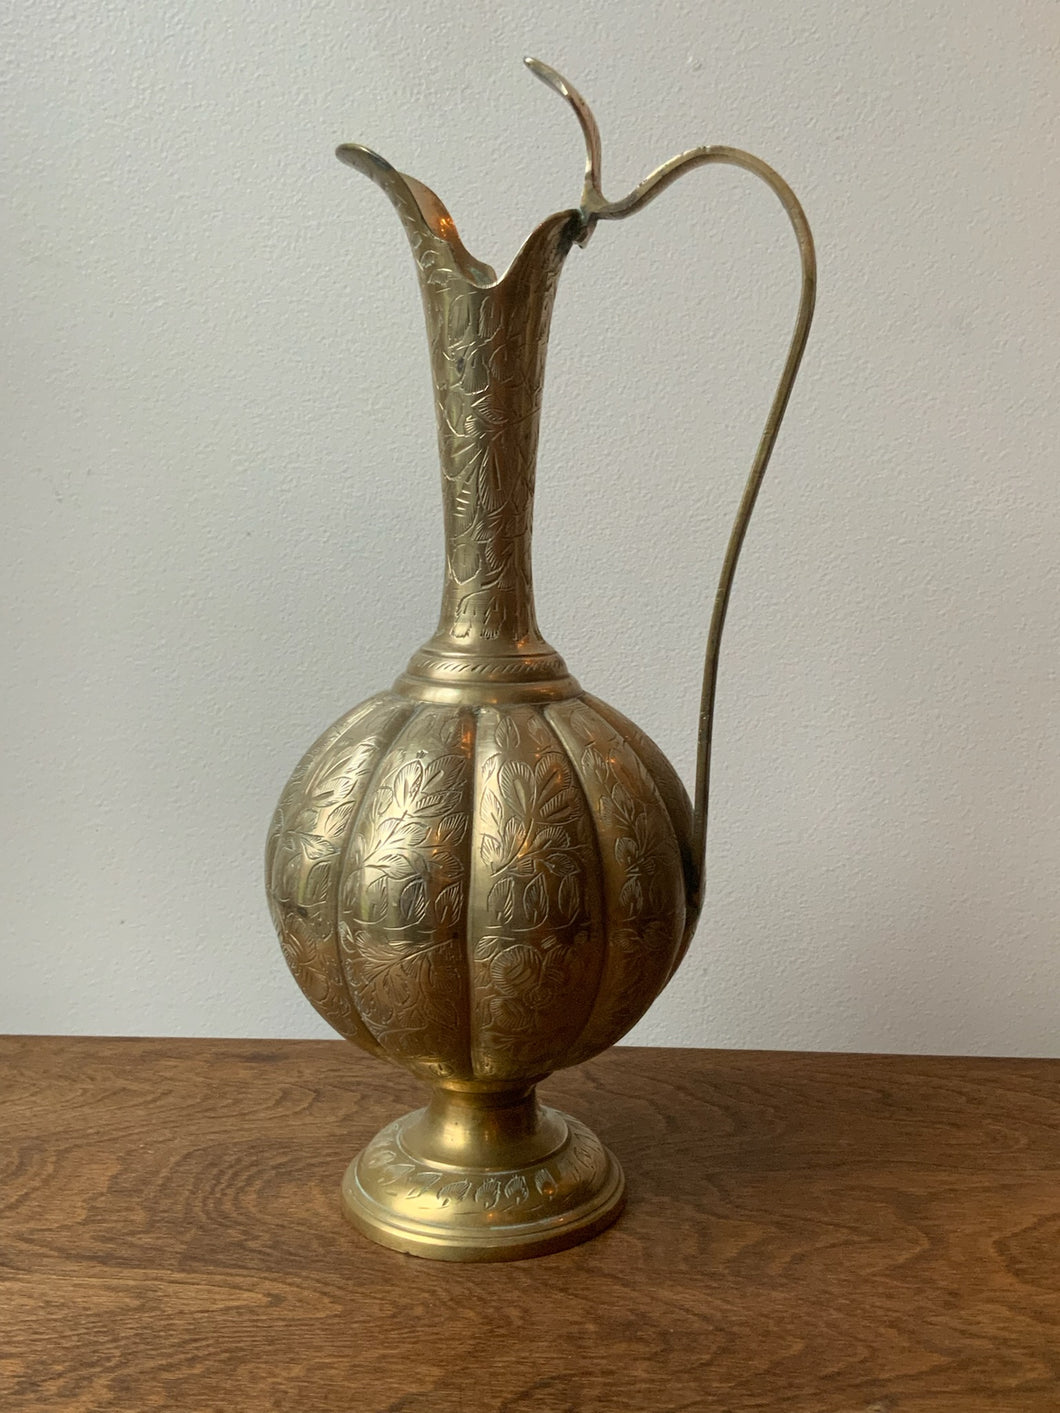 Stunning Unique Vintage Etched Brass Scalloped Bulb Turkish Coffee Pot Carafe